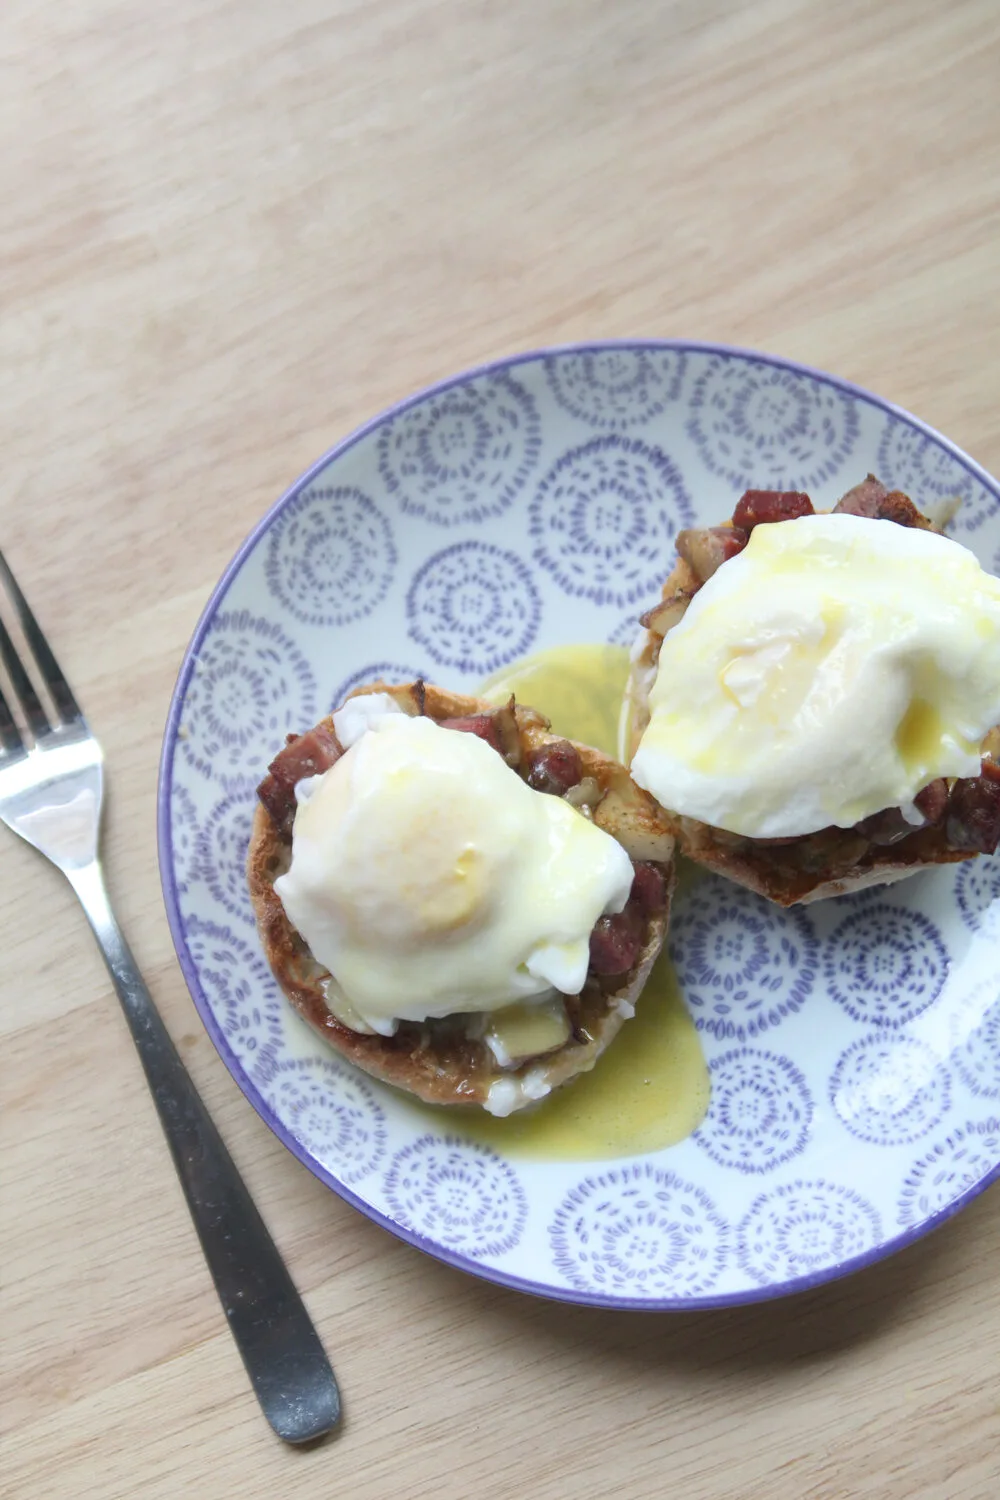 A plate with a purple and white design is shown with two light brown English muffin halves topped with brown corned beef hash, white eggs and yellow hollandaise sauce. A fork sits nearby.